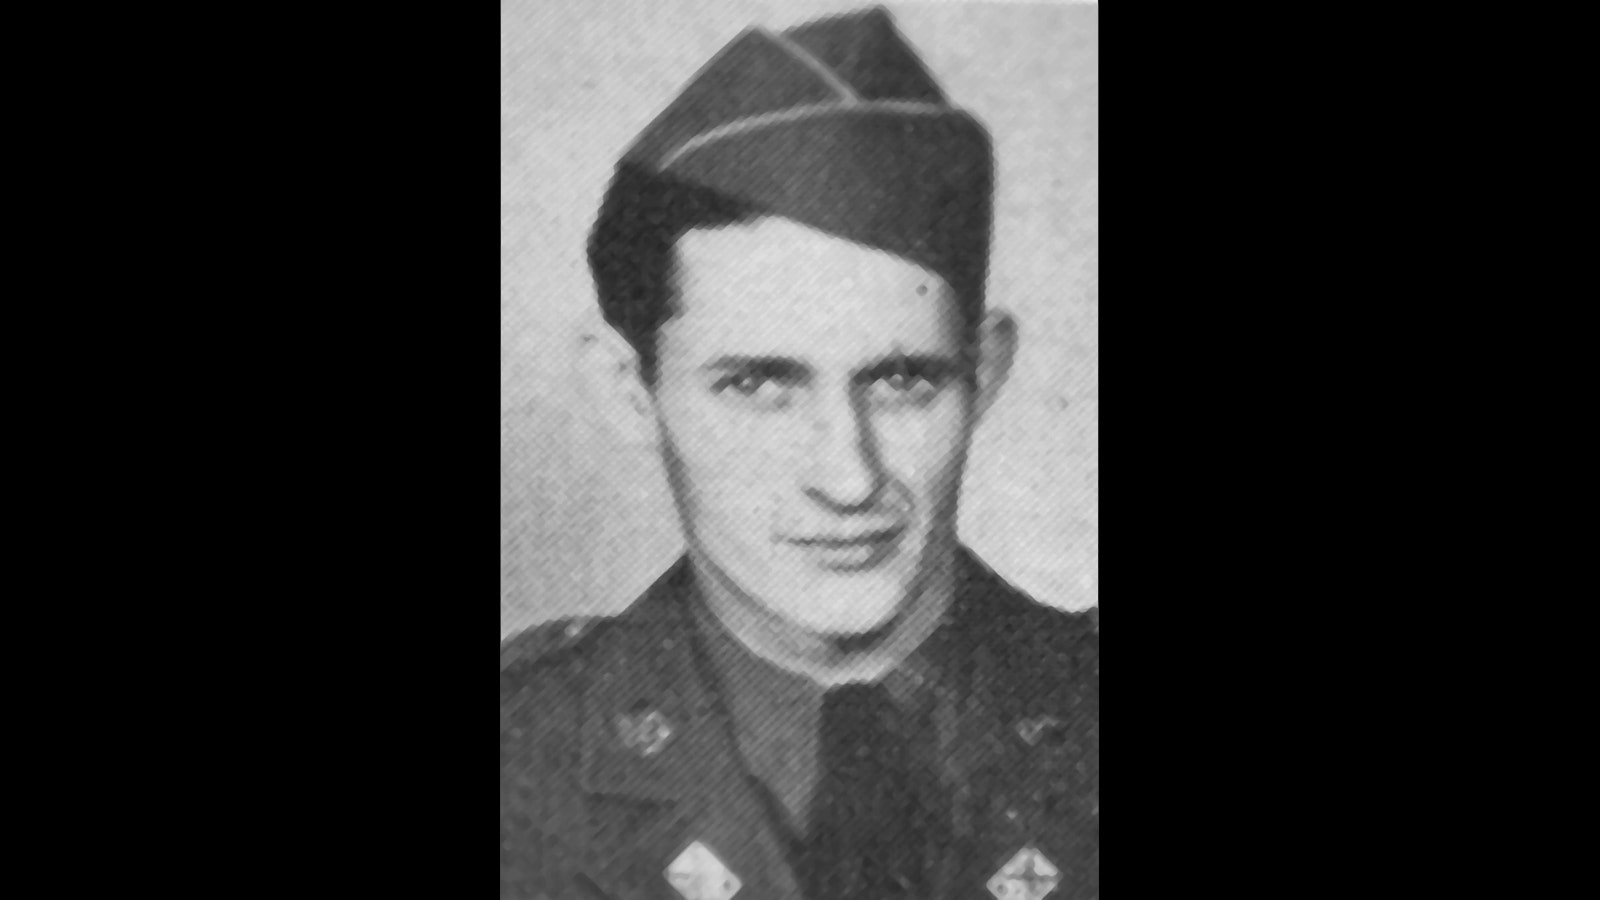 A photograph of Joseph Junior Mulvaney during his time in the Illinois National Guard’s 130th infantry. Mulvaney fought in the Pacific during World War II before returning to the United States. He was in Des Moines, Iowa, with his wife, Mary Alyce McLees, and three children when he disappeared in 1963. His skeleton was discovered in a military footlocker in 1992 in Thermopolis.